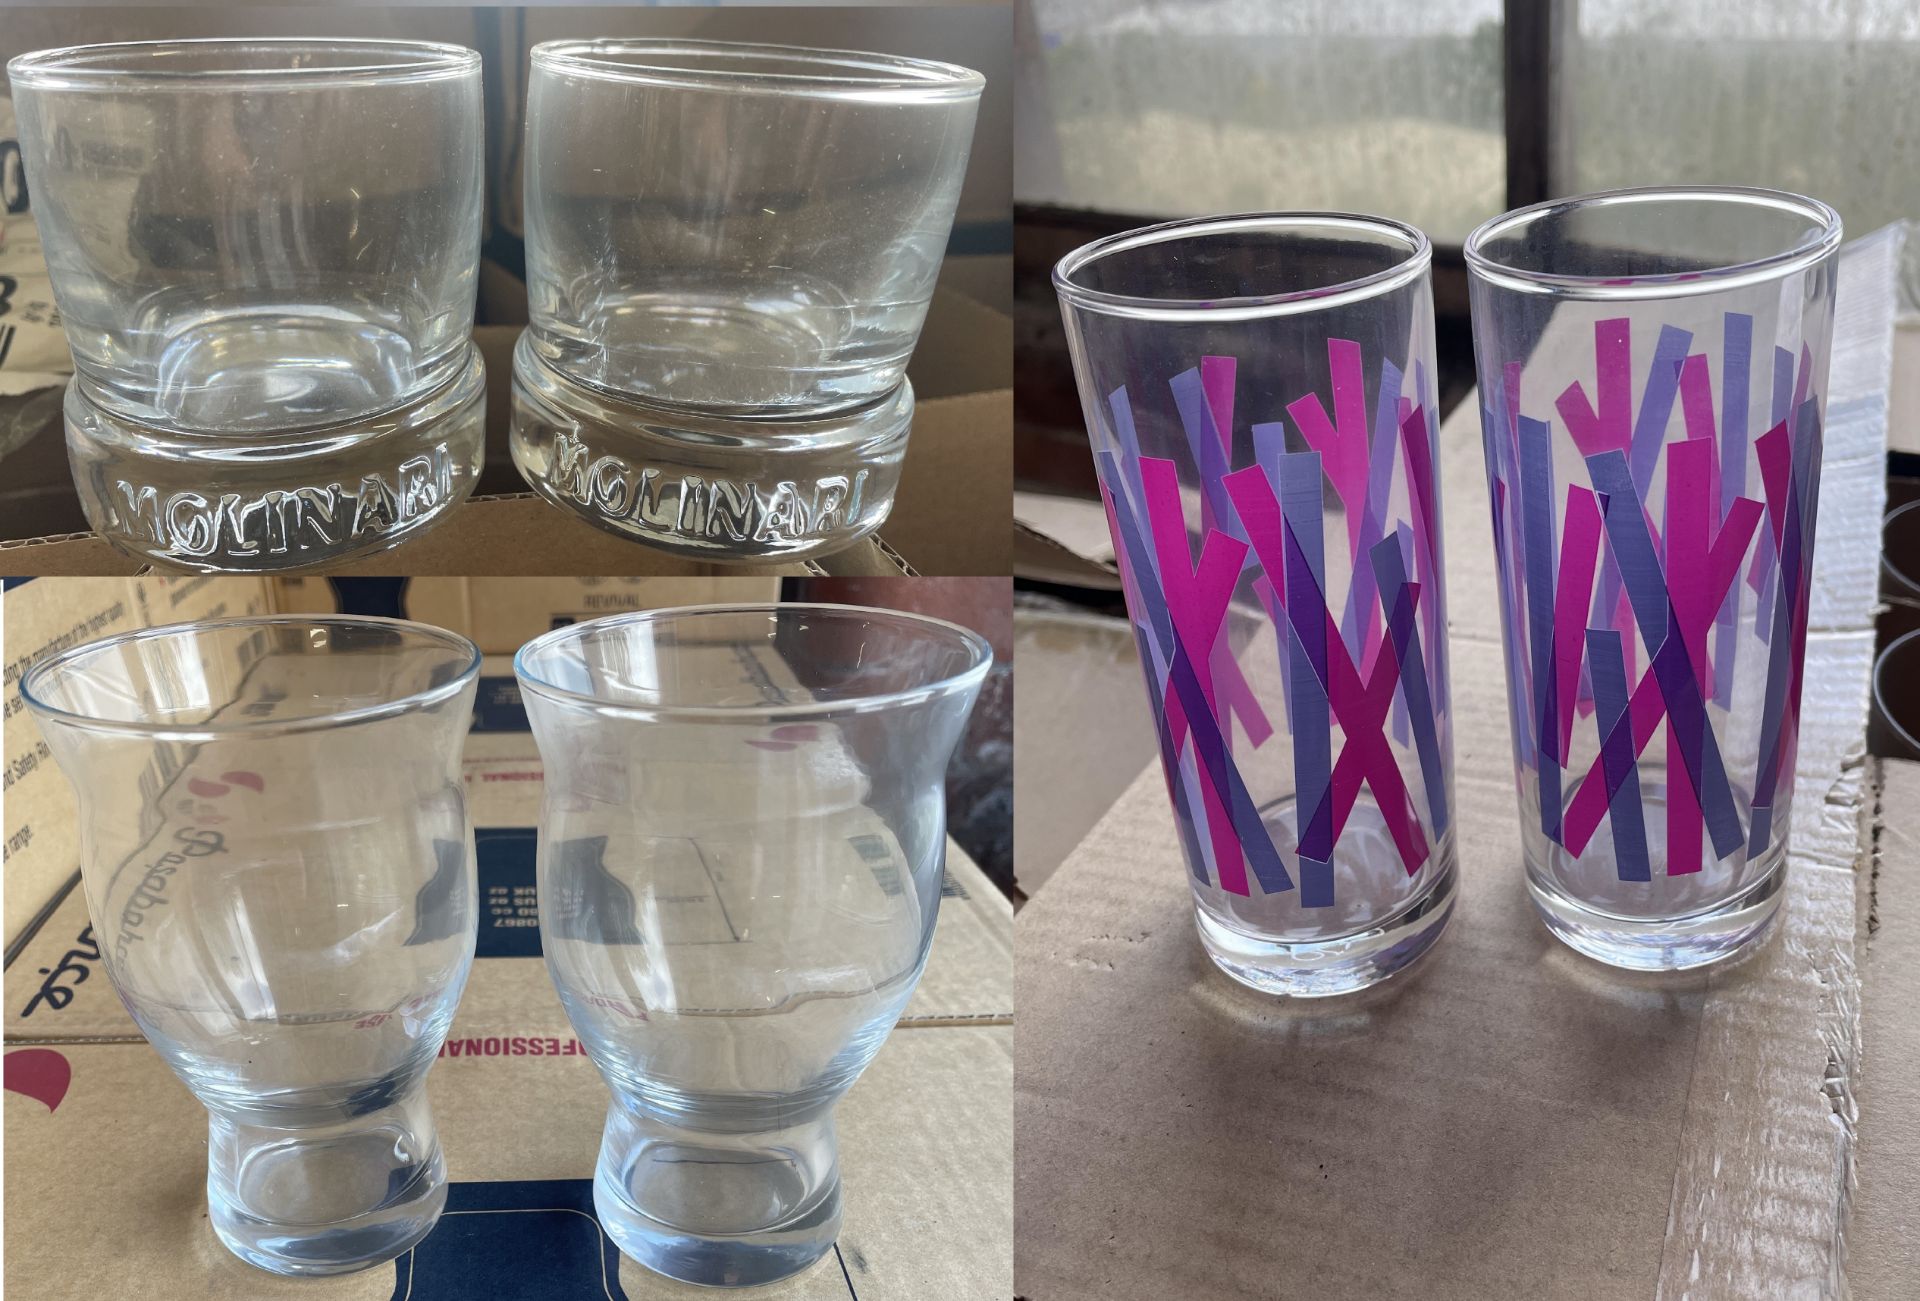 Job lot of Glasses, Whiskey tumblers, shot glasses & more - over 4000 - see description for contents